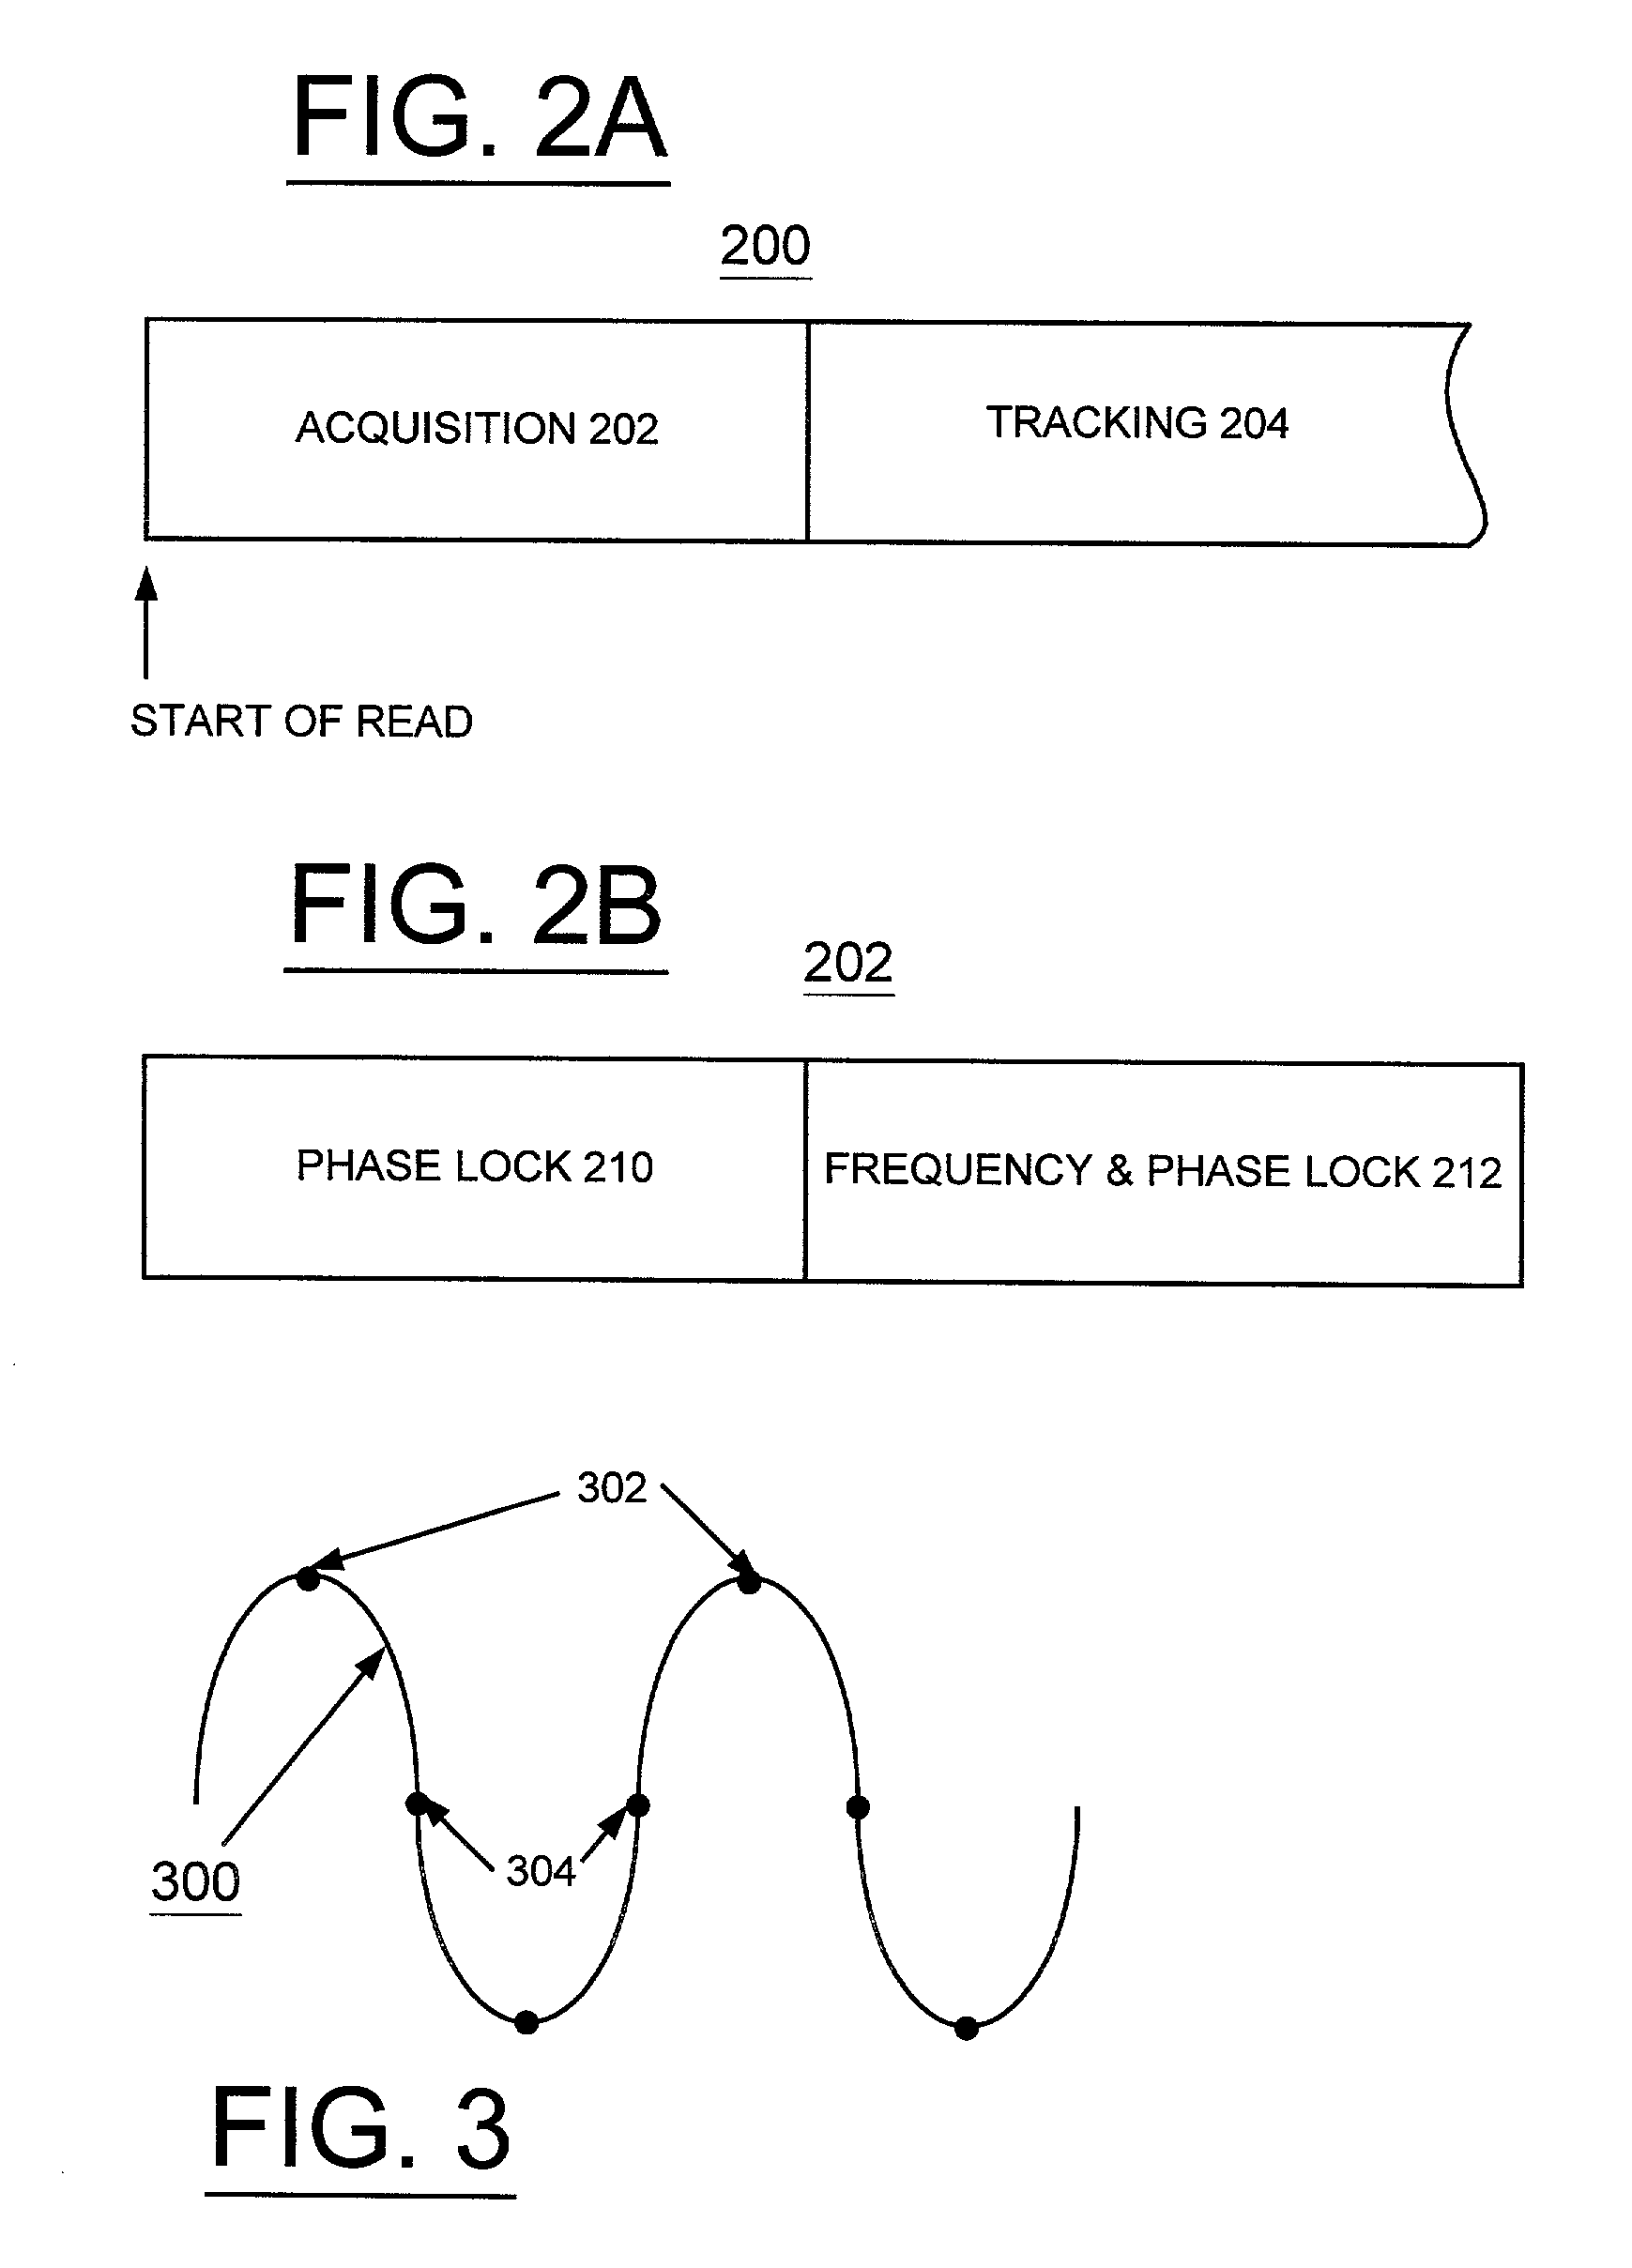 Method and apparatus for enhanced timing loop for a PRML data channel